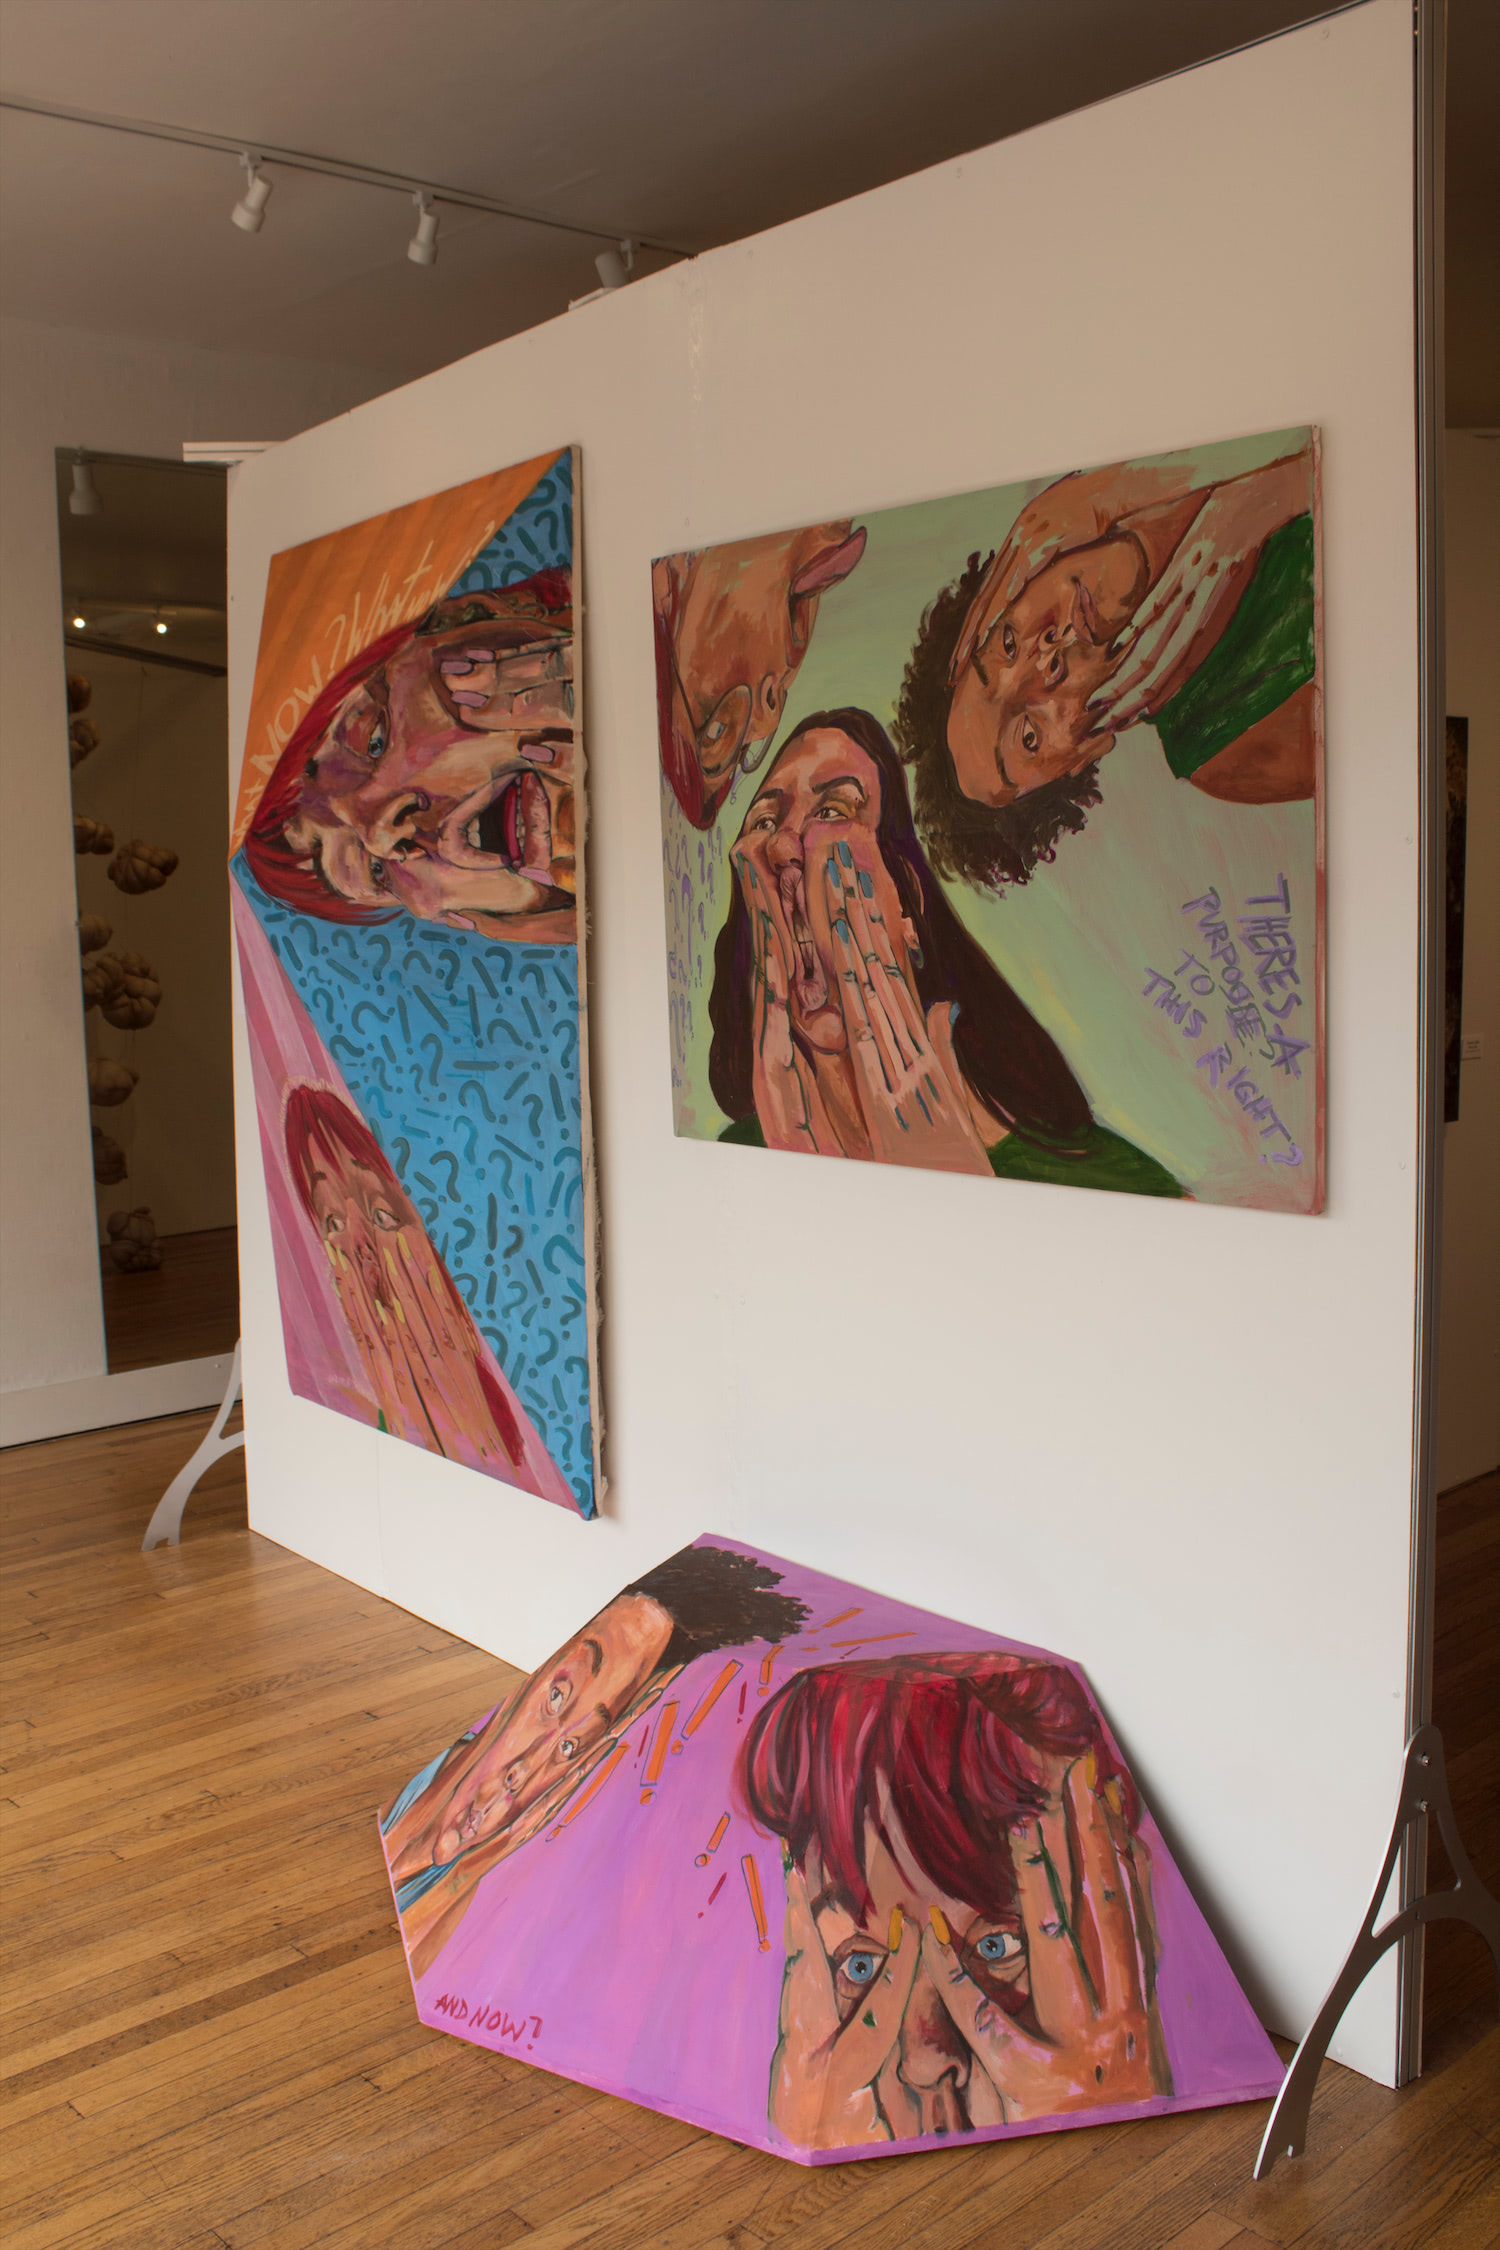 This image shows all three works together displayed on a white wall. This is taken from the right most side of the work.